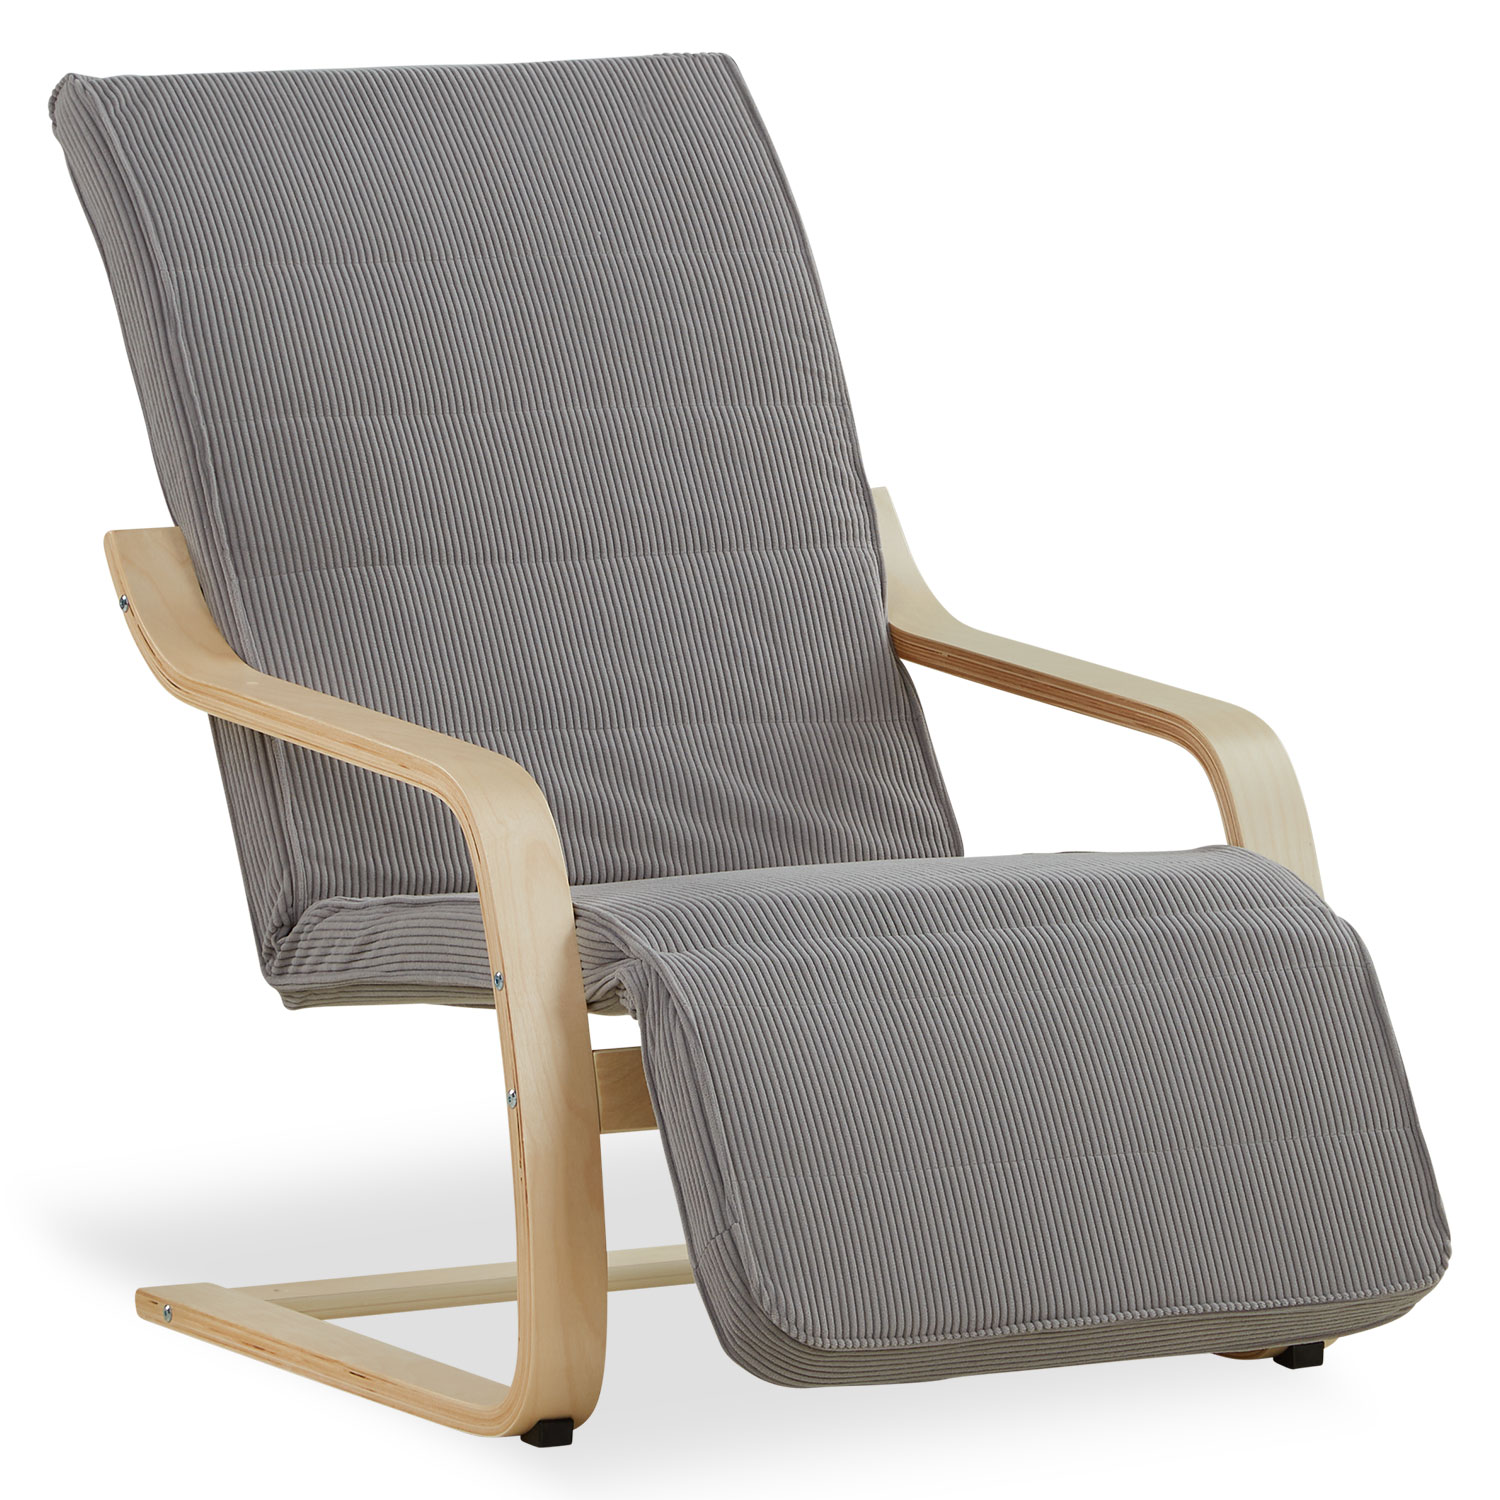 Recliner chair with footrest Dark Grey Corduroy Natural Nursing chair Chaise lounge Eames chair Armchair